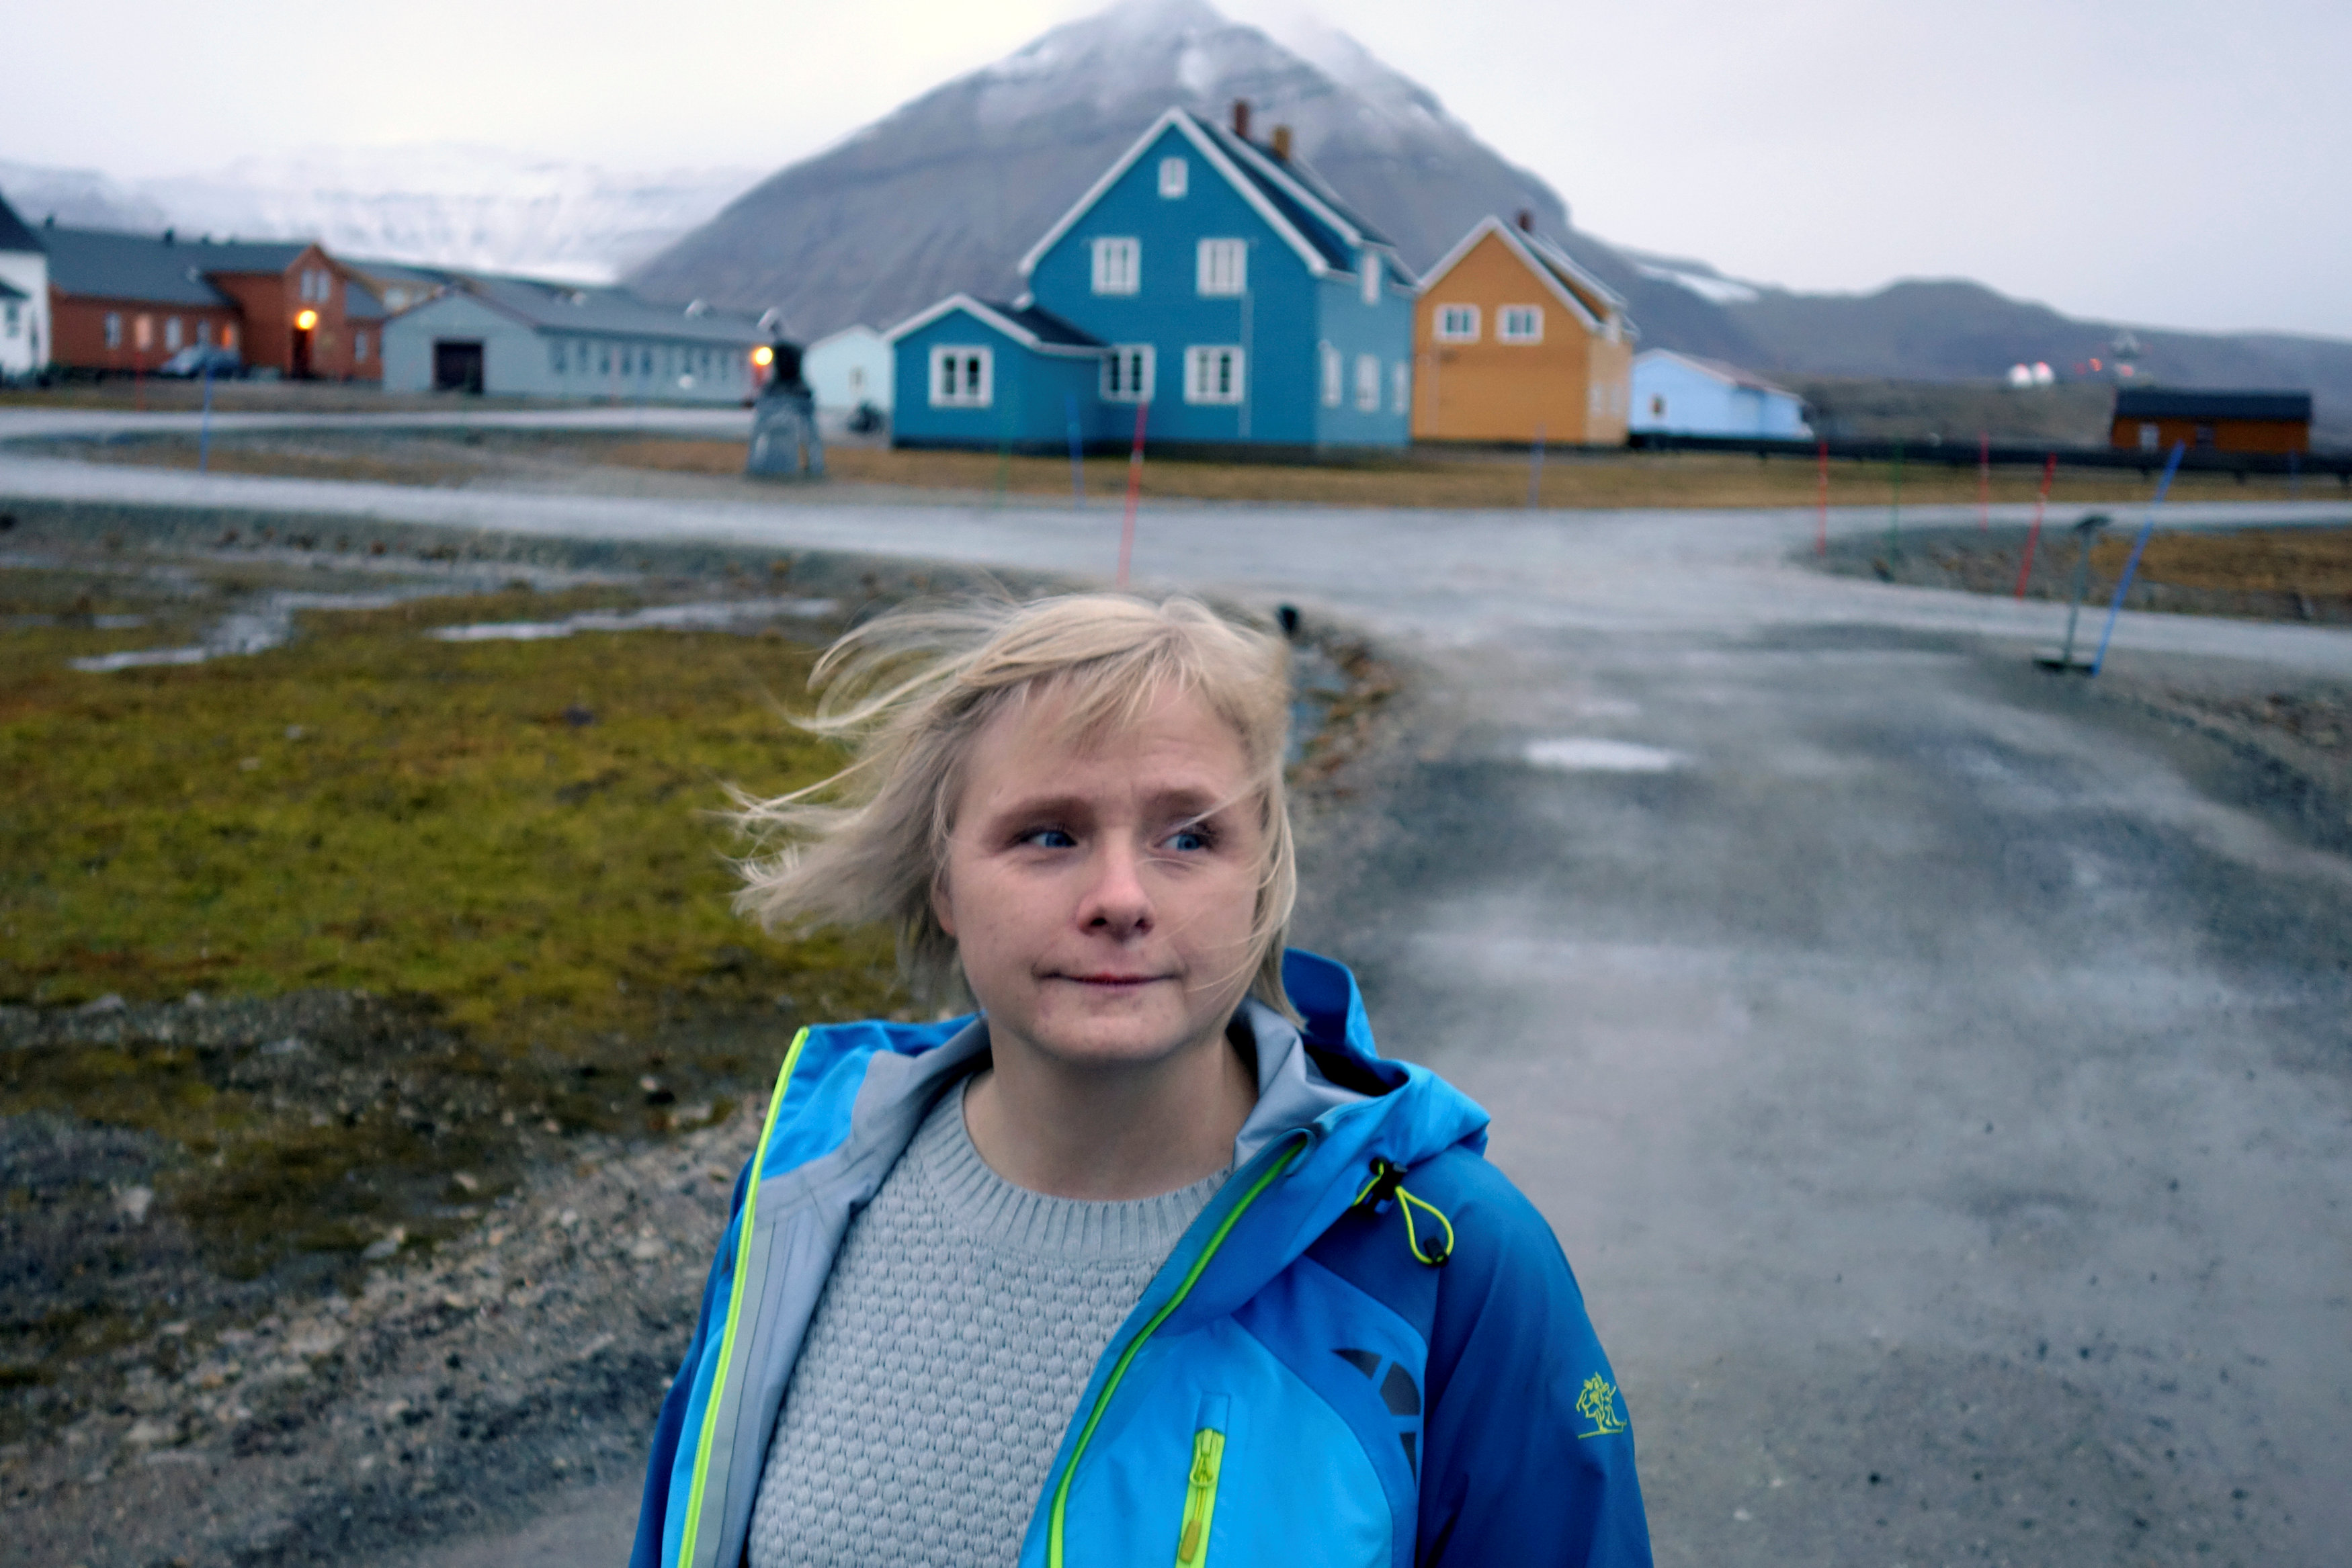 Aasne Dolve Meyer, specialist at the research station, poses for a picture in Ny-Aalesund, Norway, September 21, 2016. Picture taken September 21, 2016. REUTERS/Gwladys Fouche